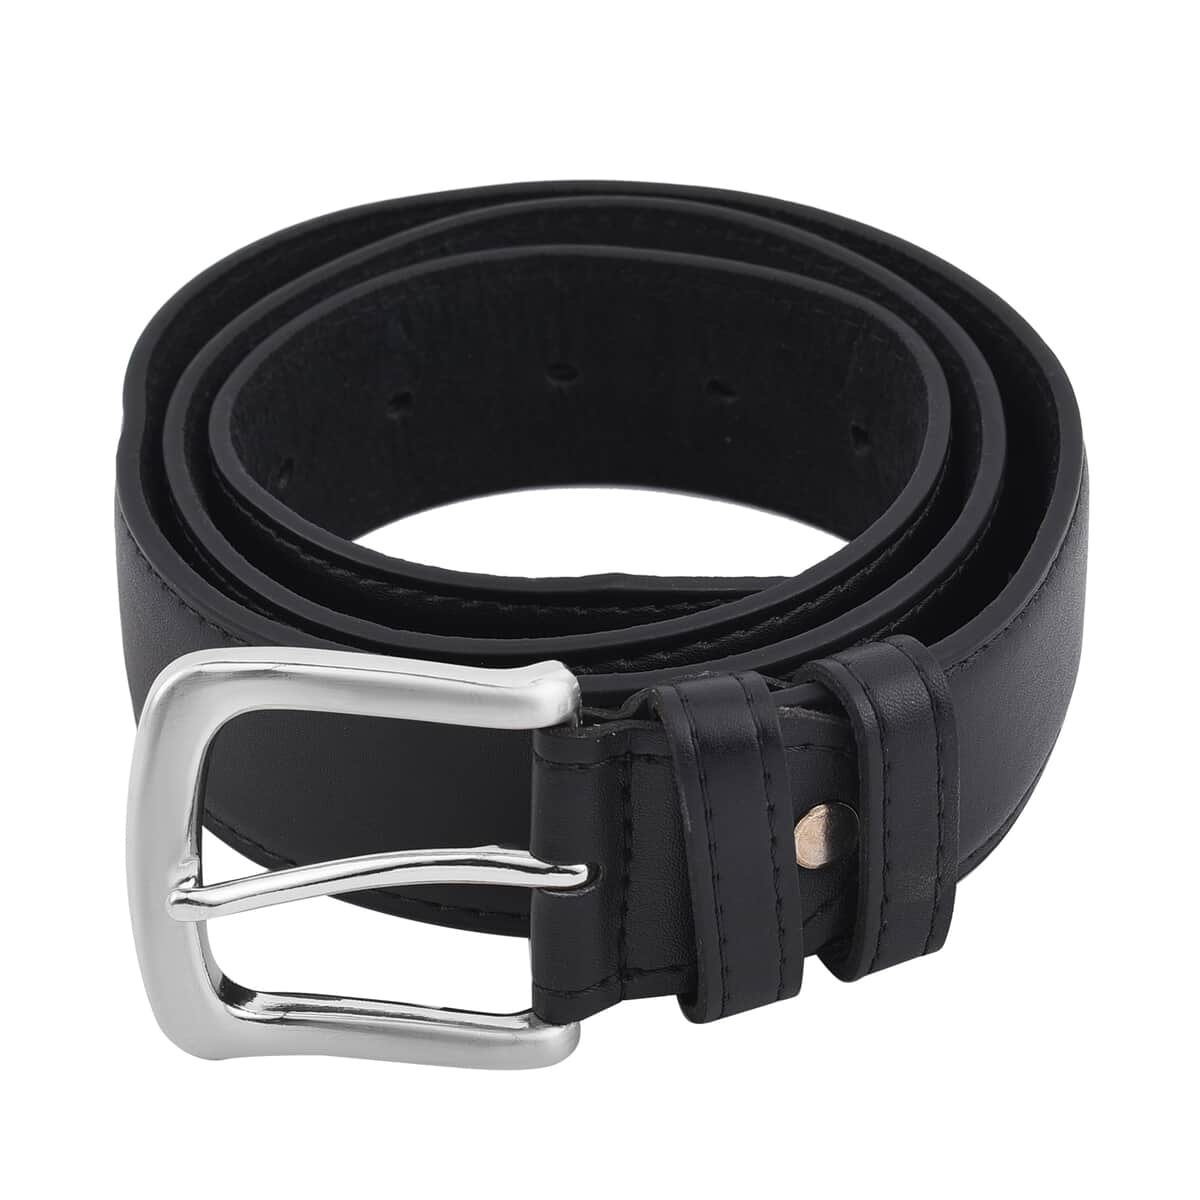 2-in-1 Black Wallet Faux Leather Belt with Hidden Zipper Pocket - L (47-49 Inches) image number 0